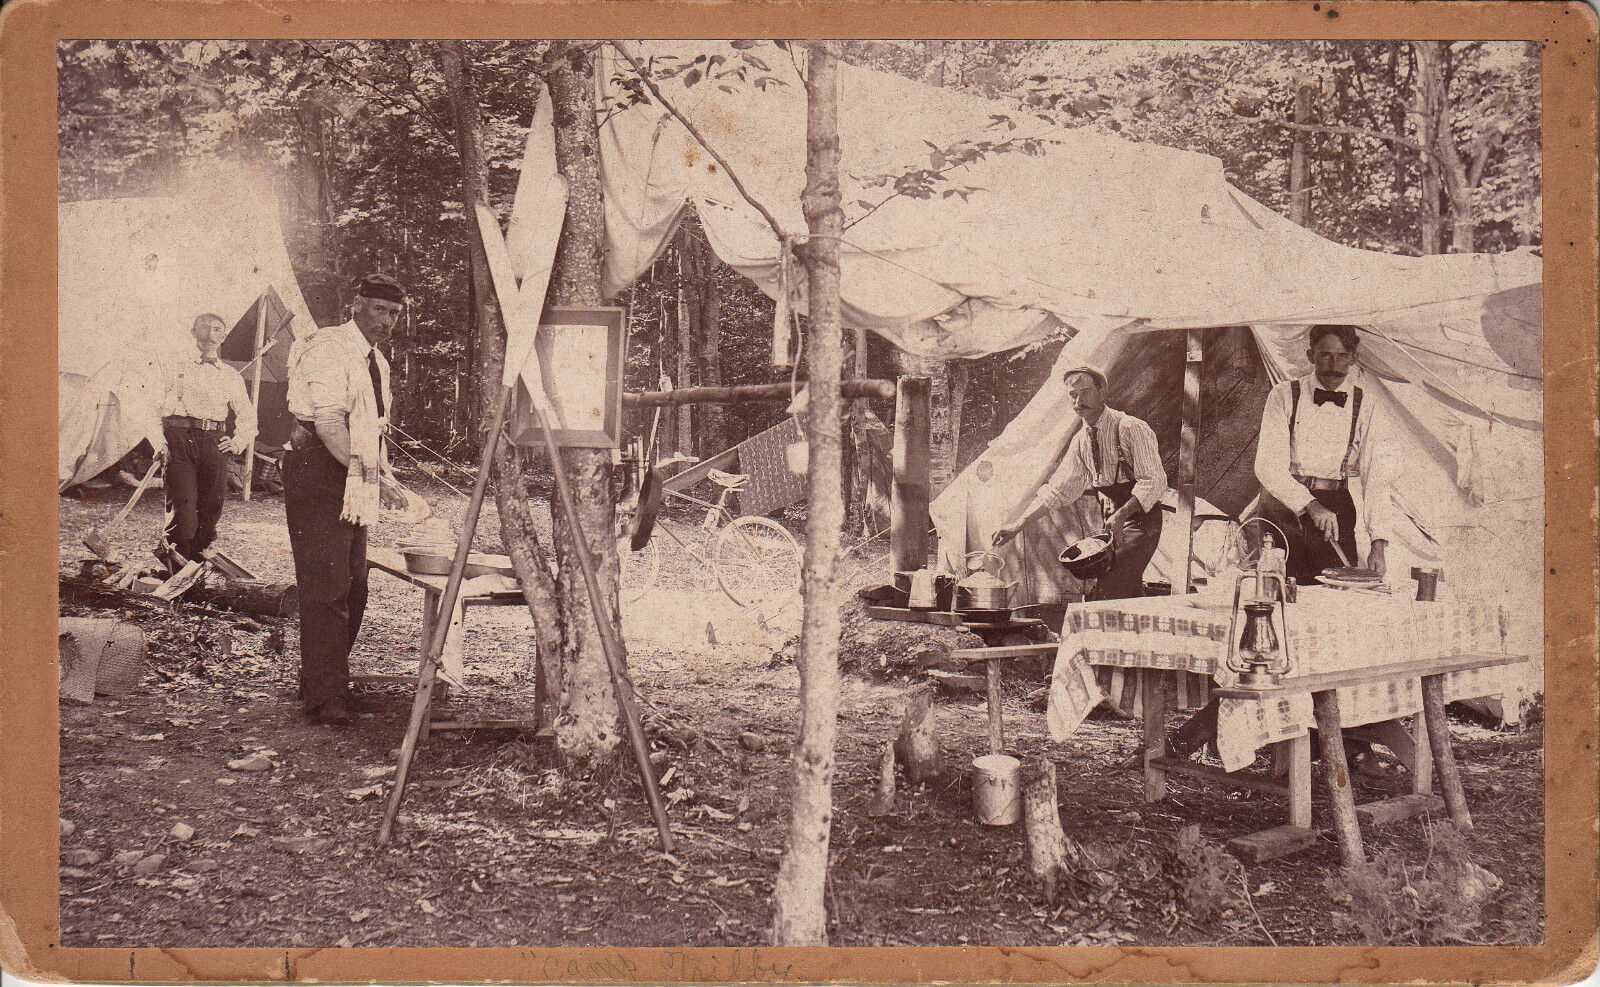 EARLY OUTDOOR FORMAL CAMPING SCENE ~ c. - 1910